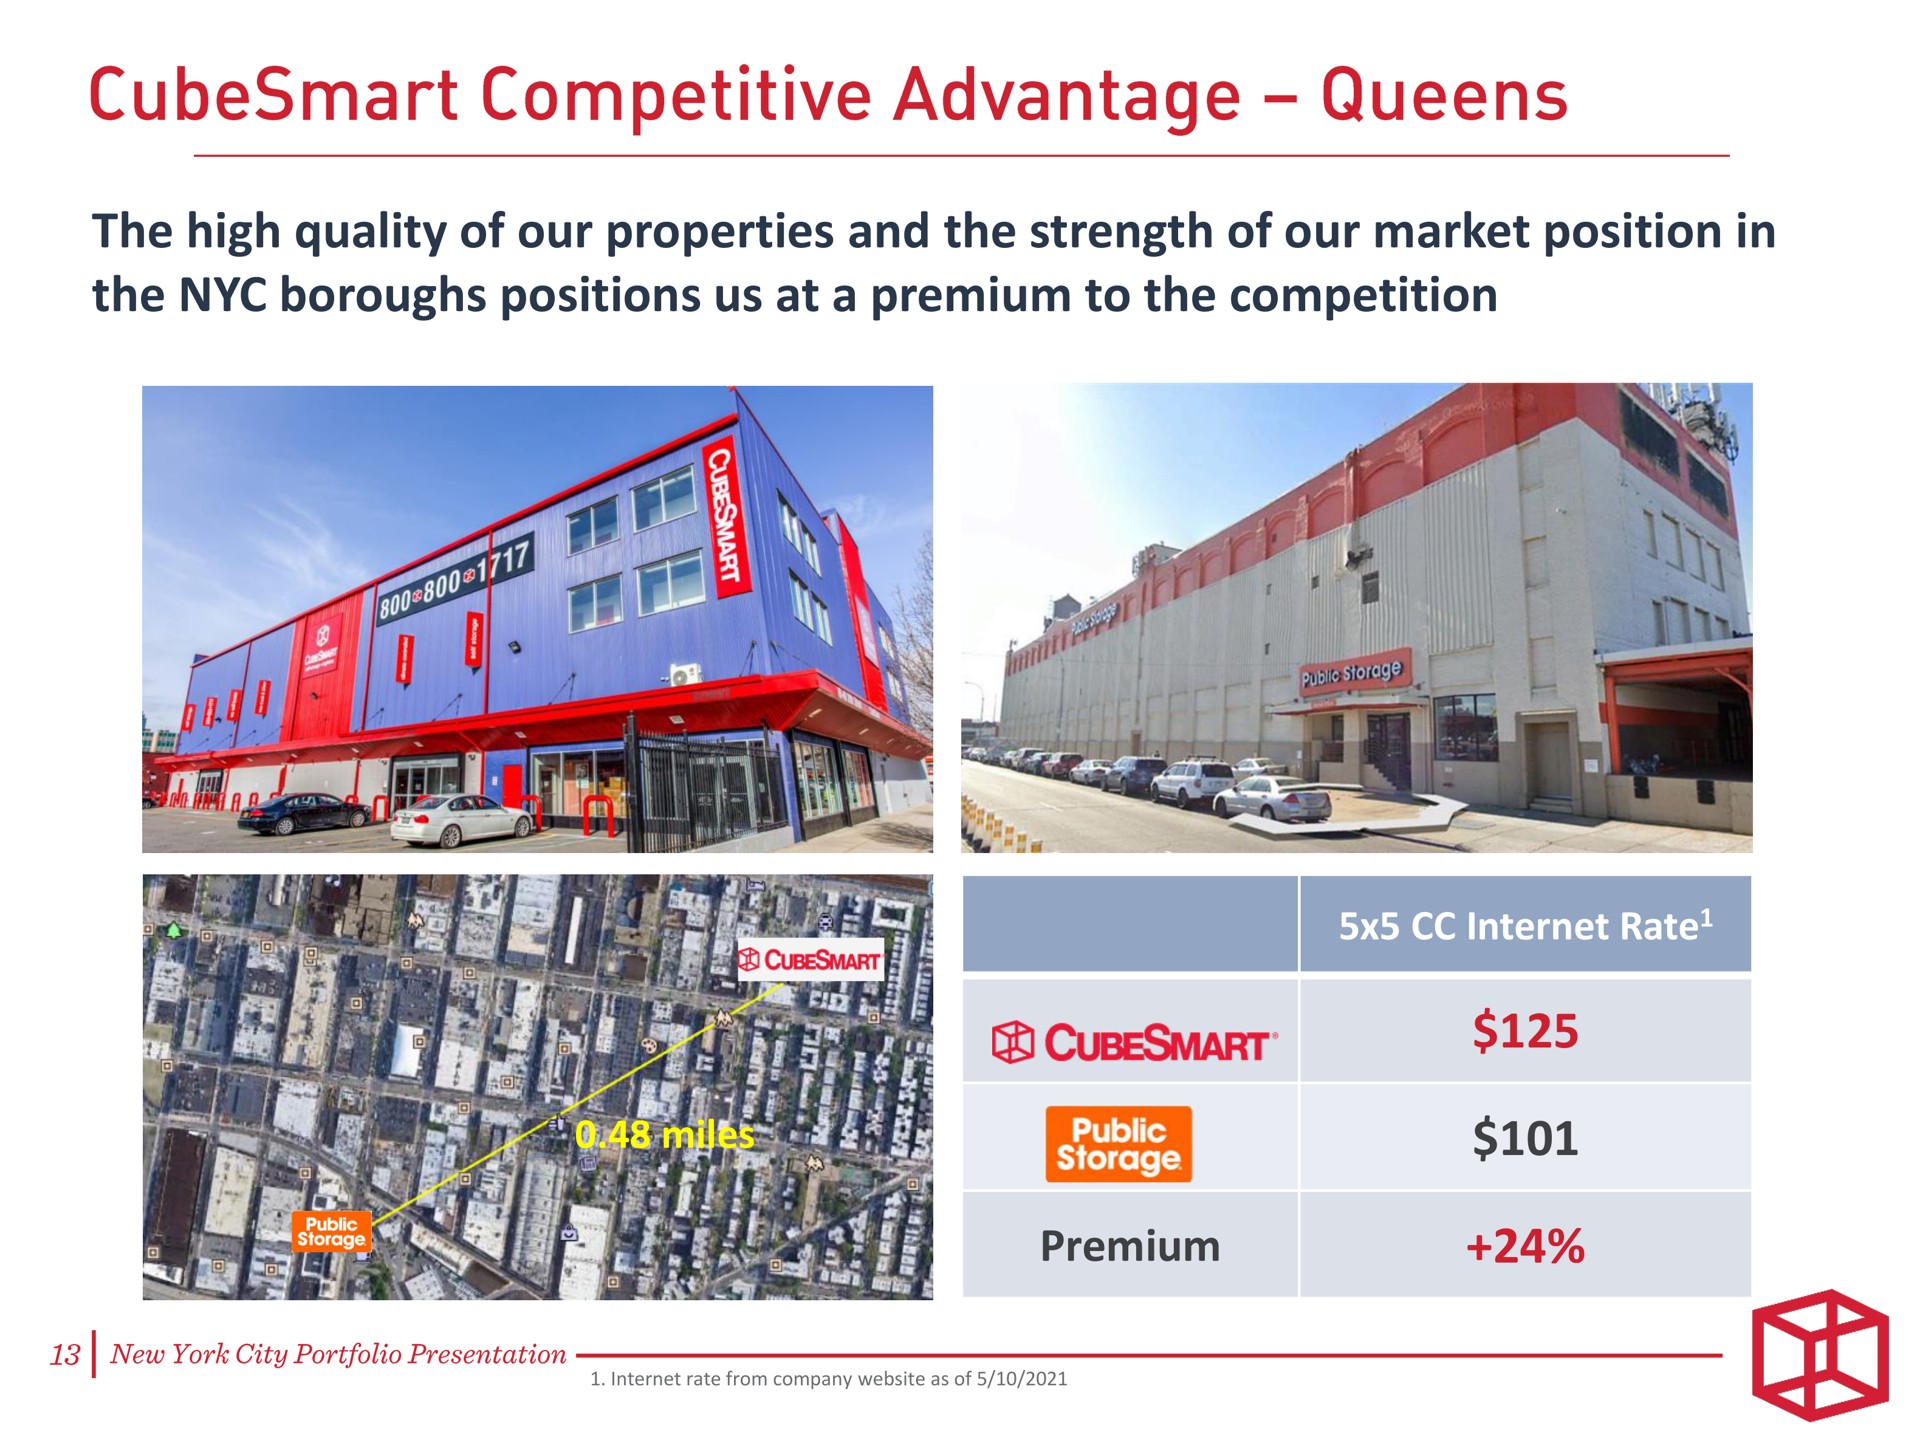 the high quality of our properties and the strength of our market position in the boroughs positions us at a premium to the competition competitive advantage queens | CubeSmart